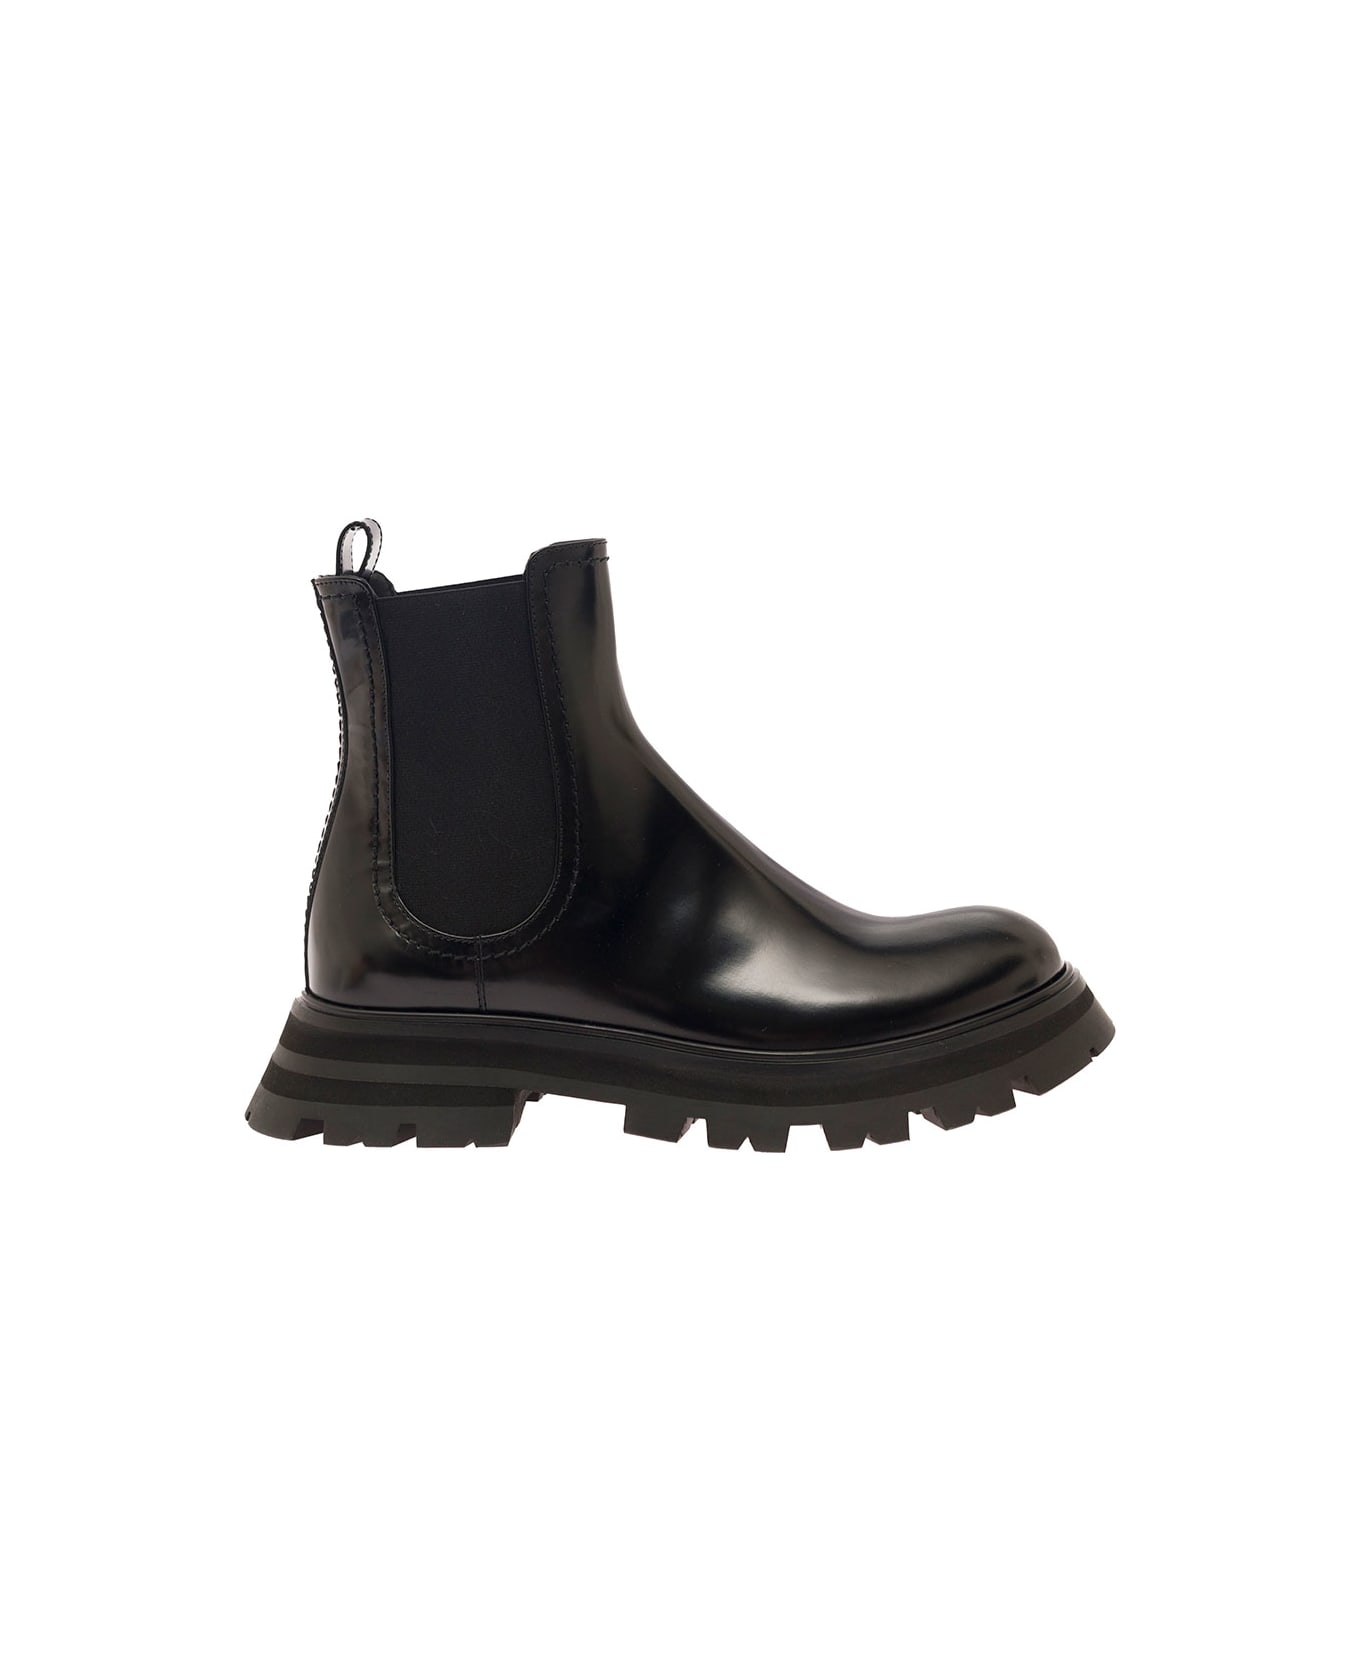 Alexander McQueen Black Chelsea Boots With Elastic Inserts In Smooth Leather Woman - Black